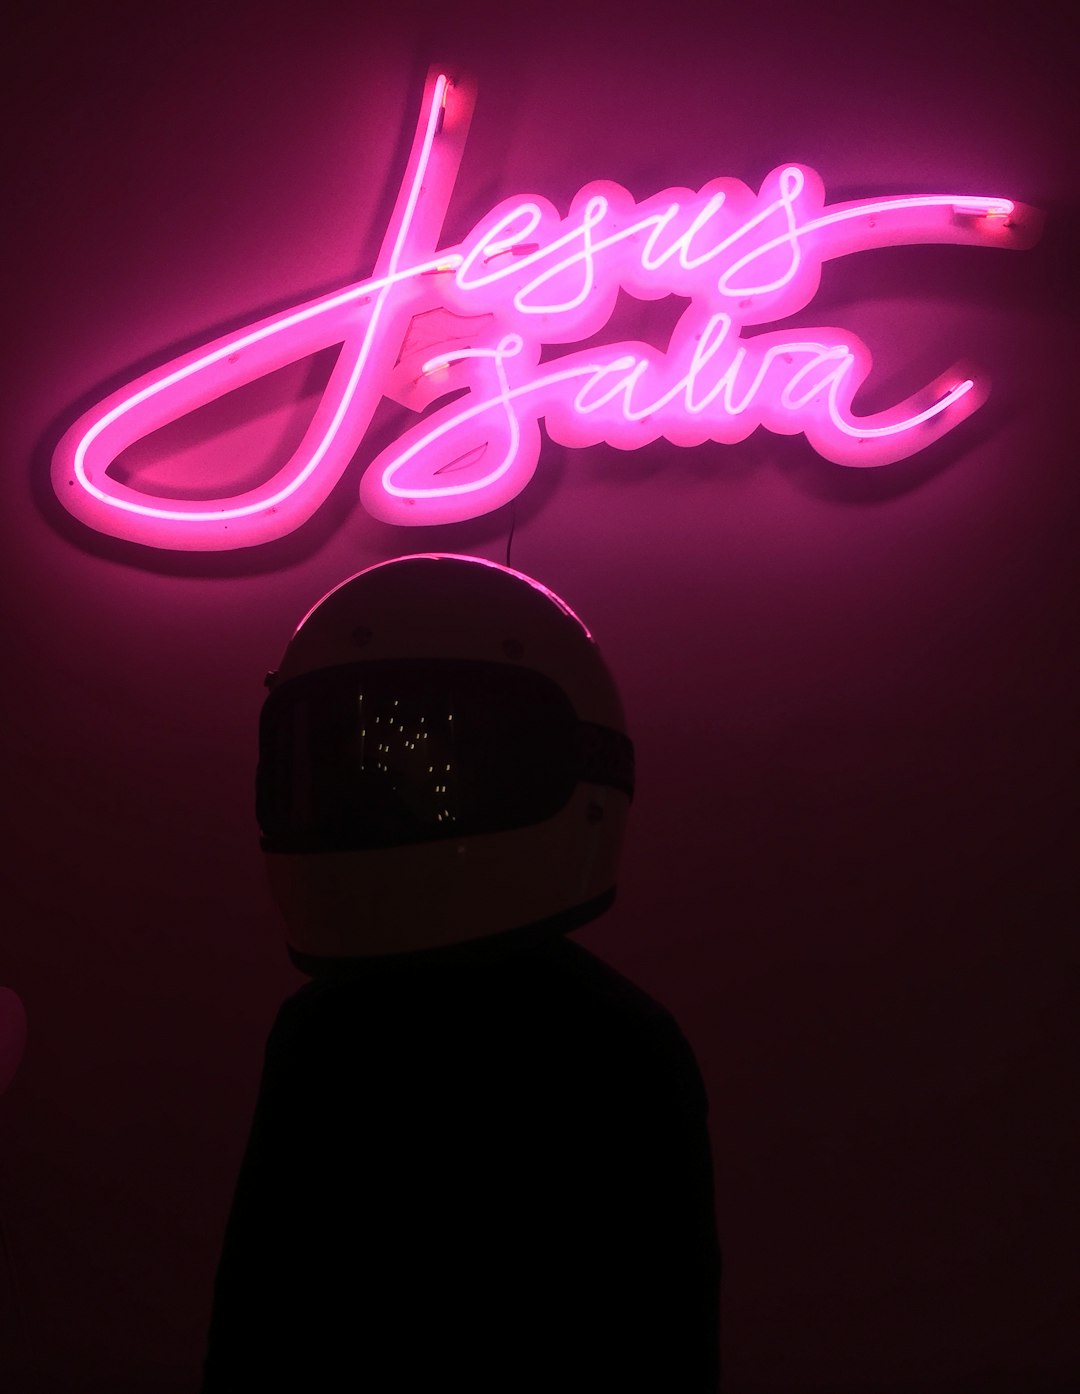  Pink  Neon  Pictures Download Free Images on Unsplash